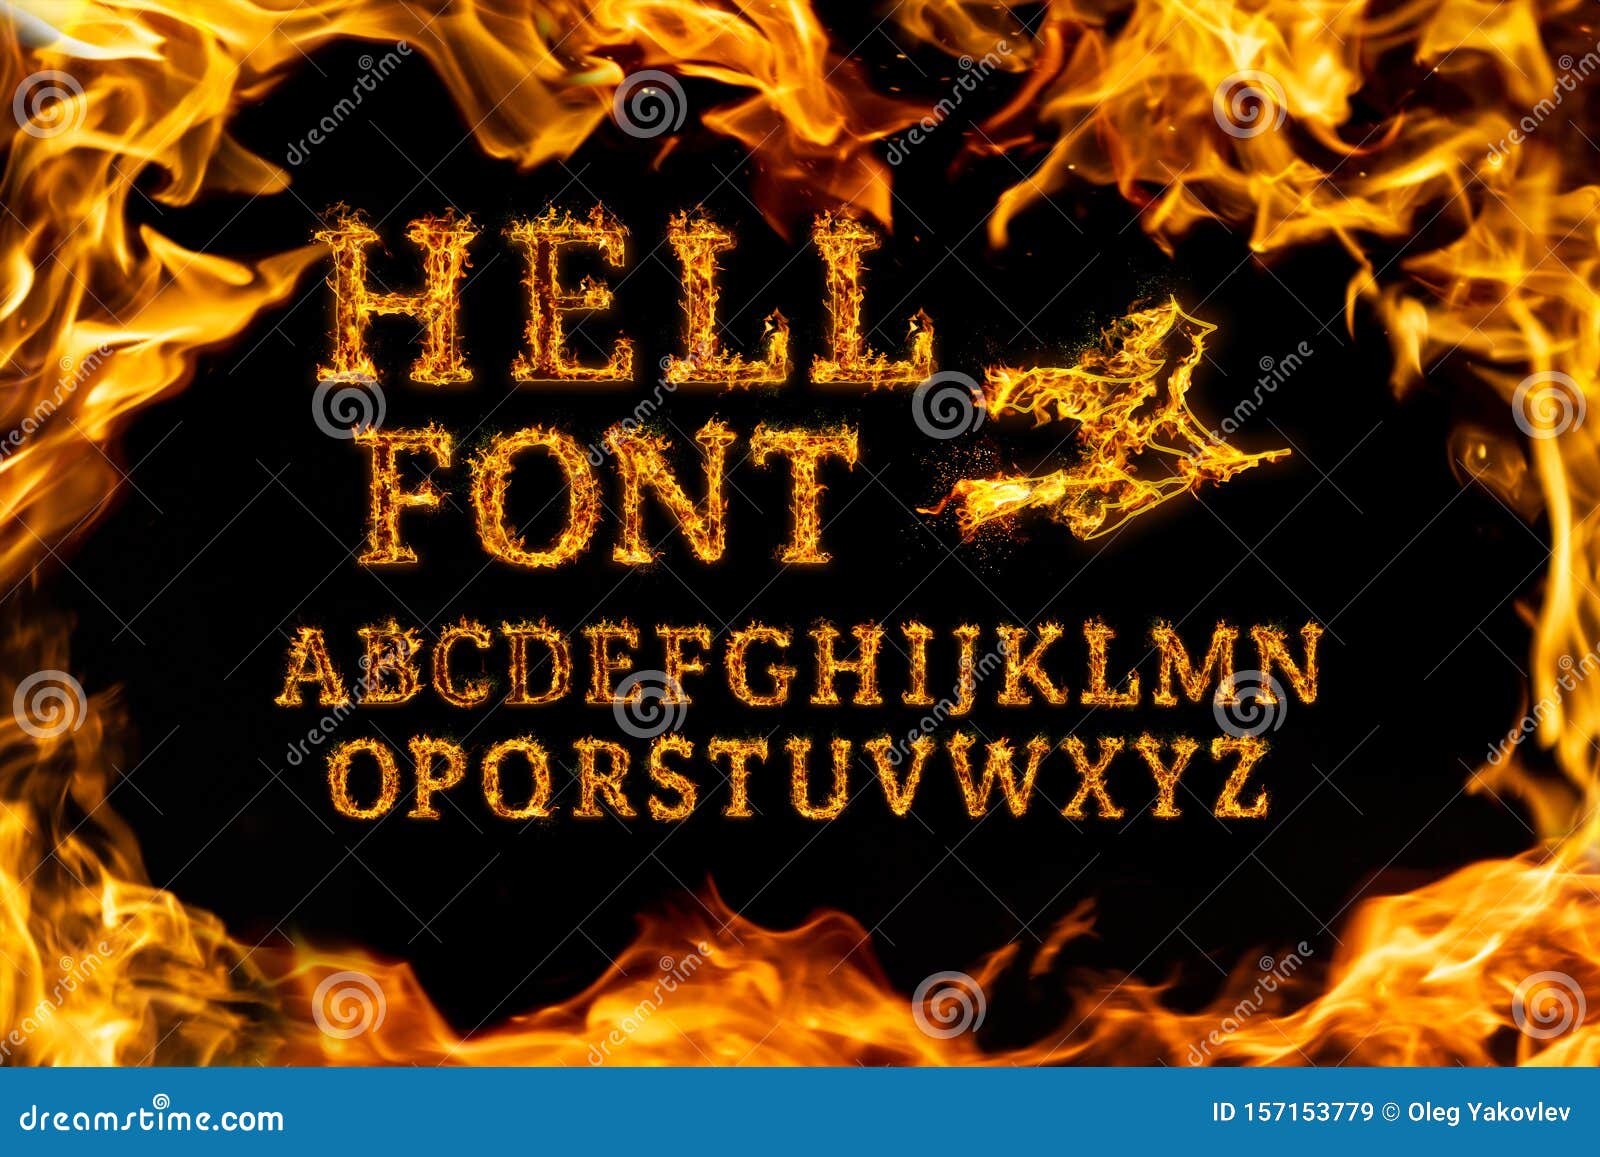 Hell Font Set. Fire Flames on Black Isolated Background Stock ...